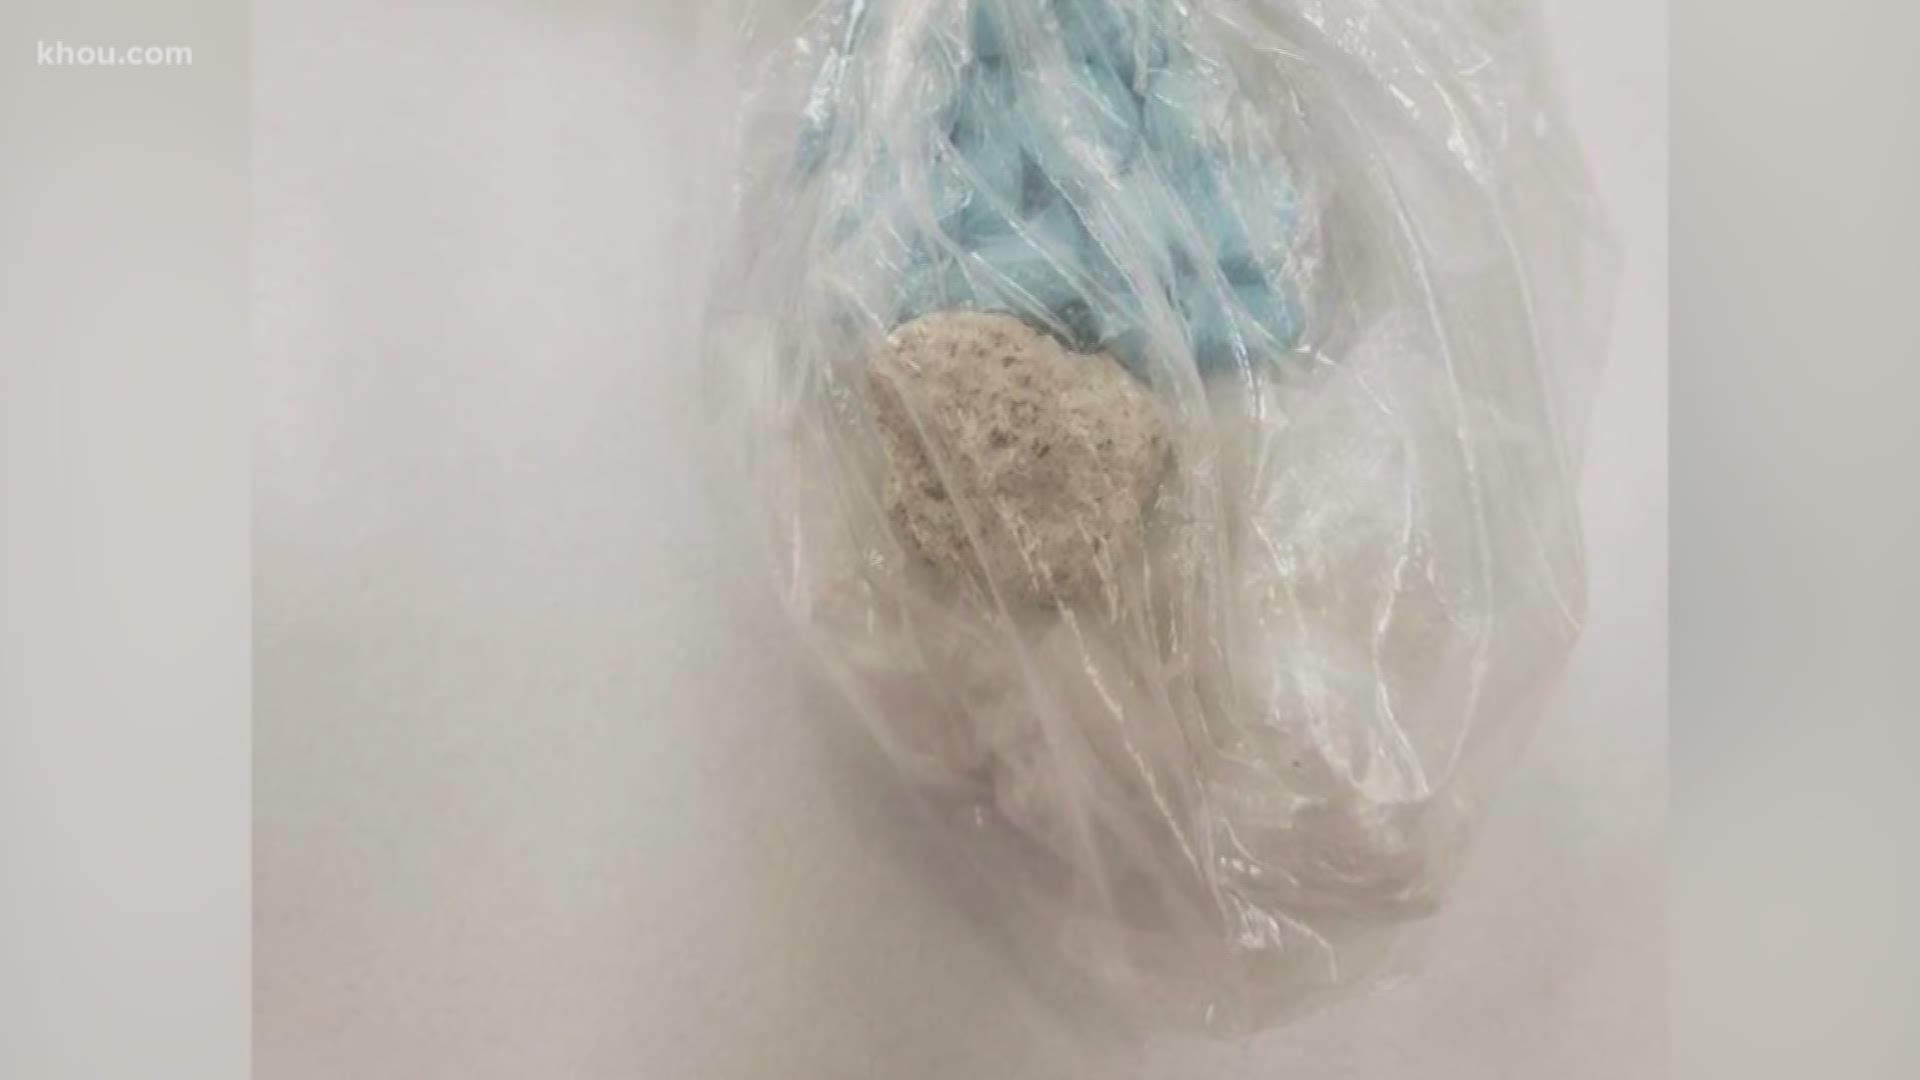 Experts say the super drug looks like small chunks of concrete and is 10,000 times more potent than morphine.